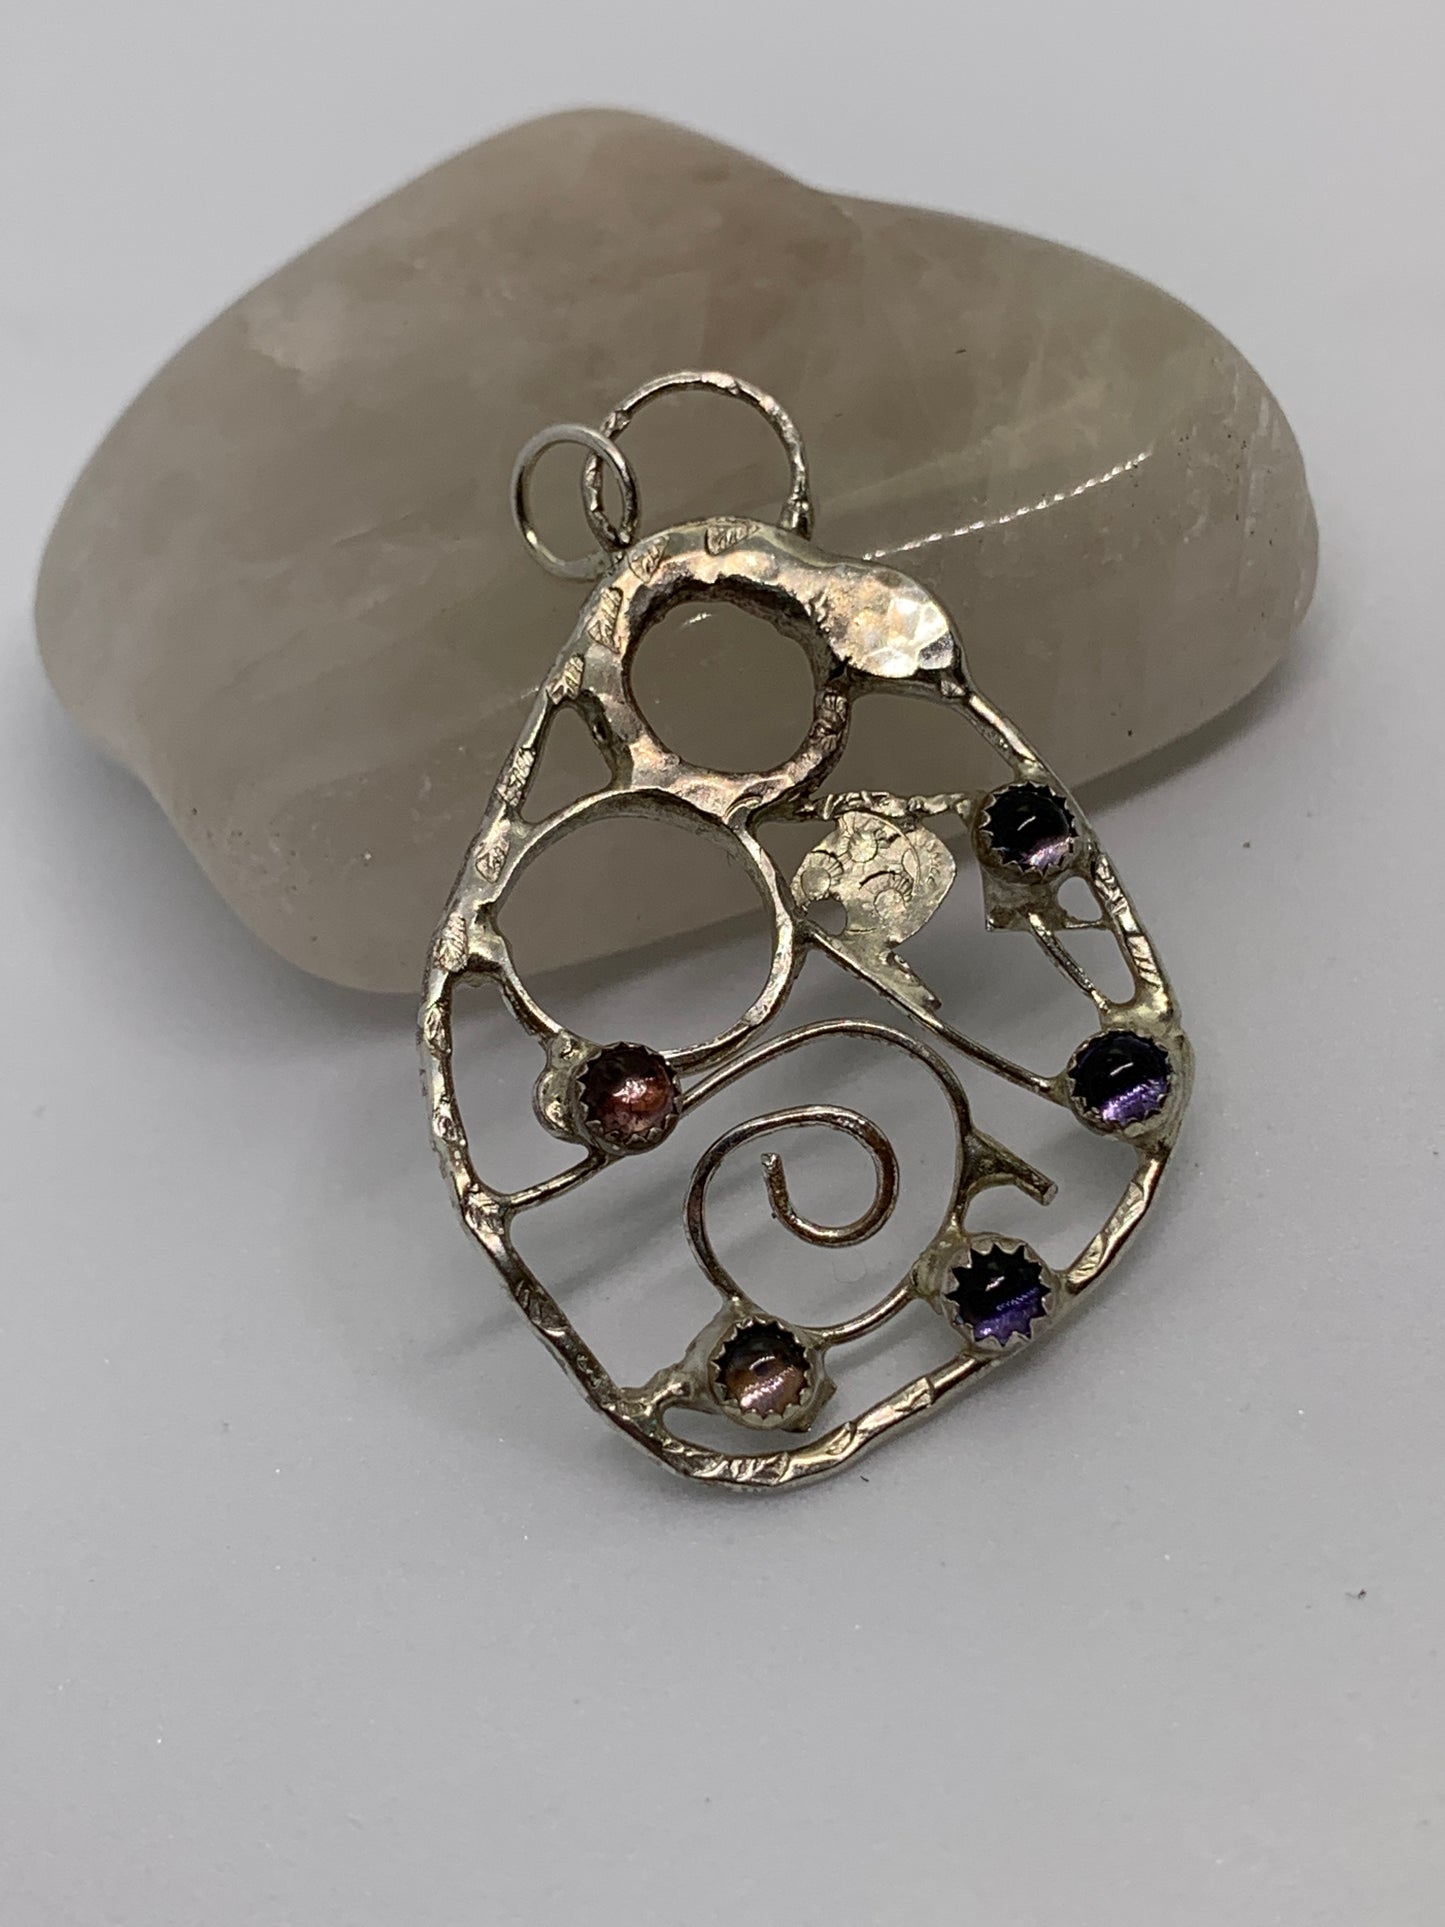 Large Abstract Filigree Sterling Silver Pendant with Tourmaline and Iolite Stones